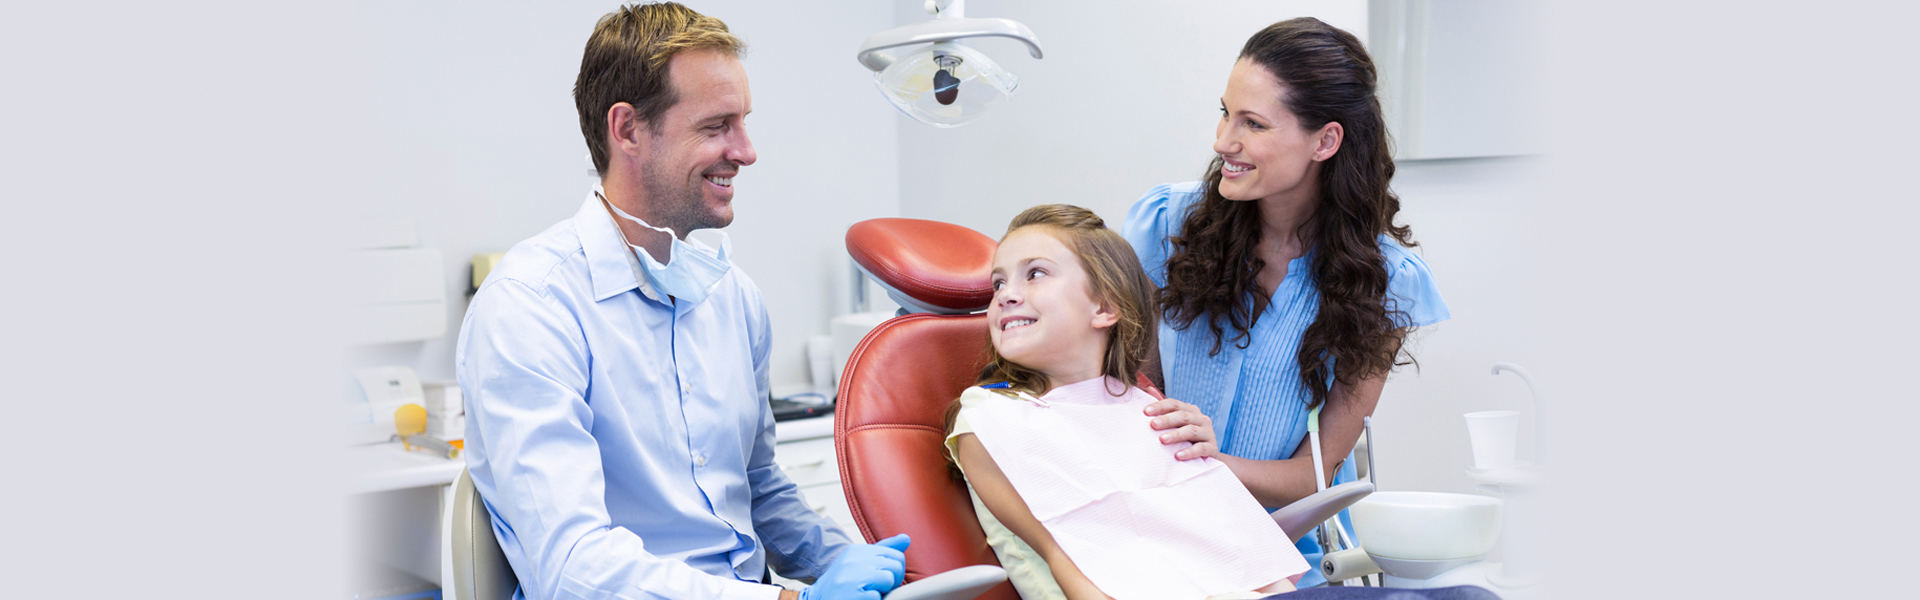 Thinking of Taking Your Child to a Pediatric Dentist? Here’s What You Should Know